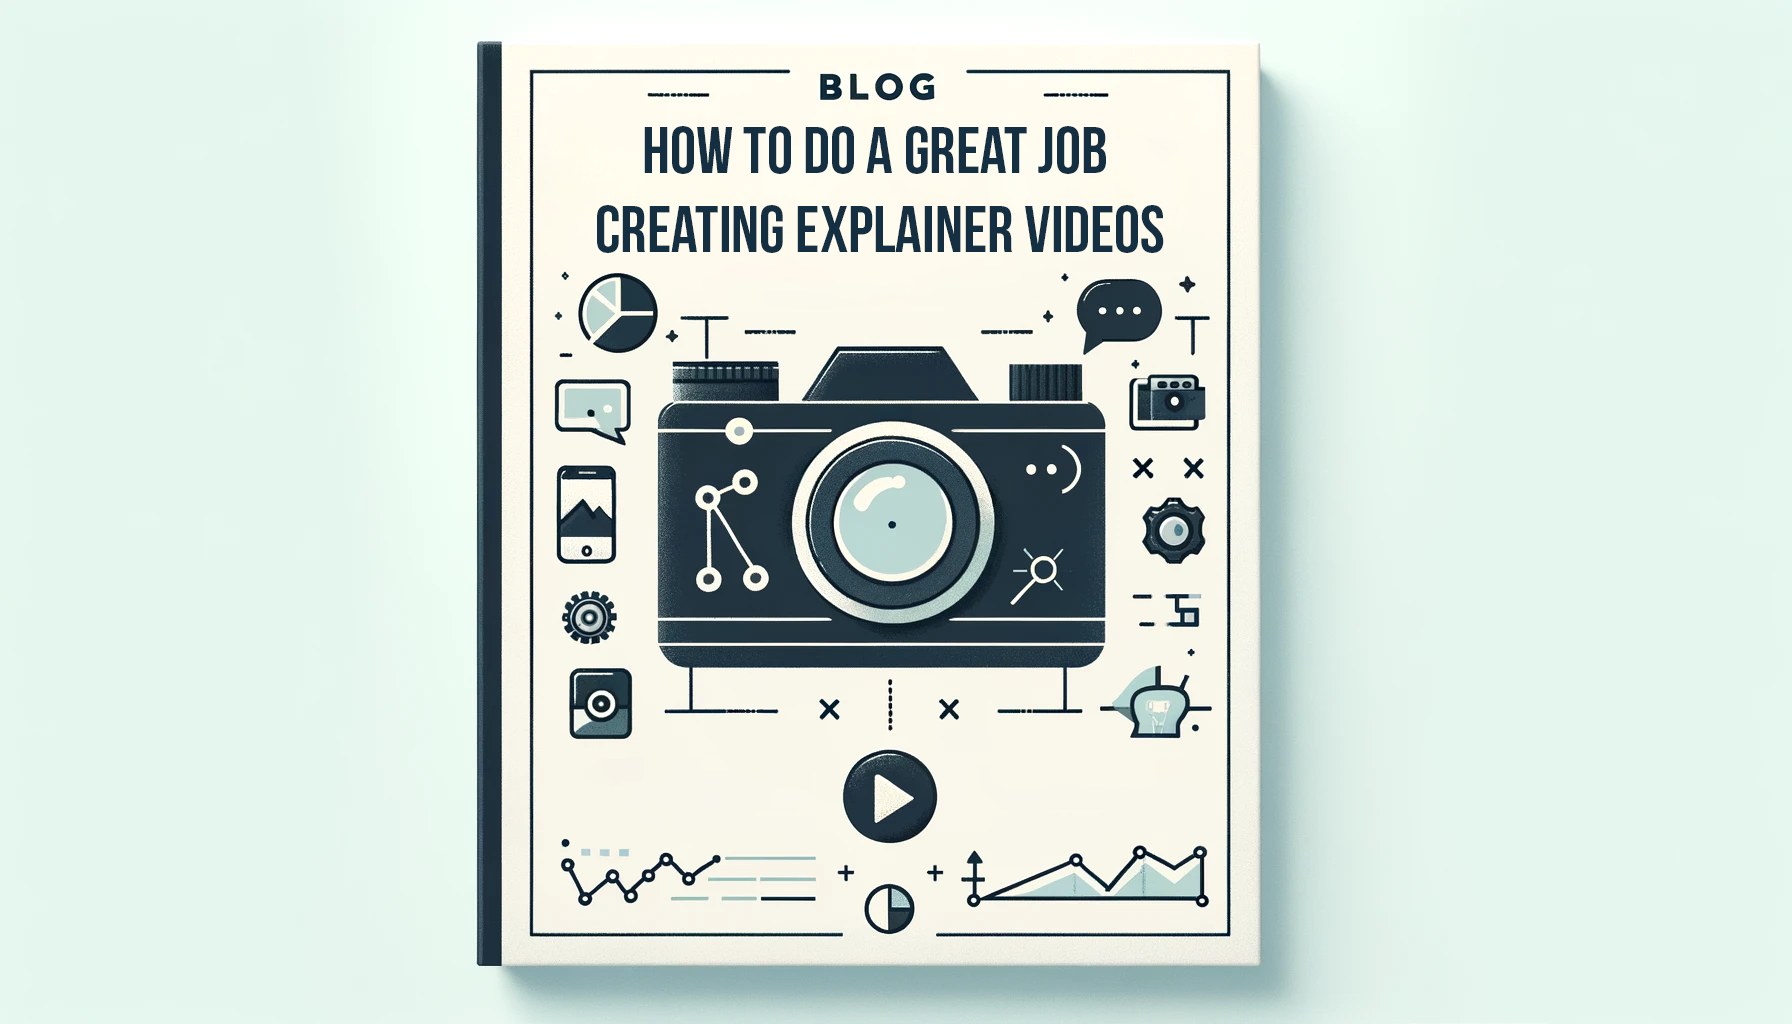 How to Do a Great Job Creating Explainer Videos